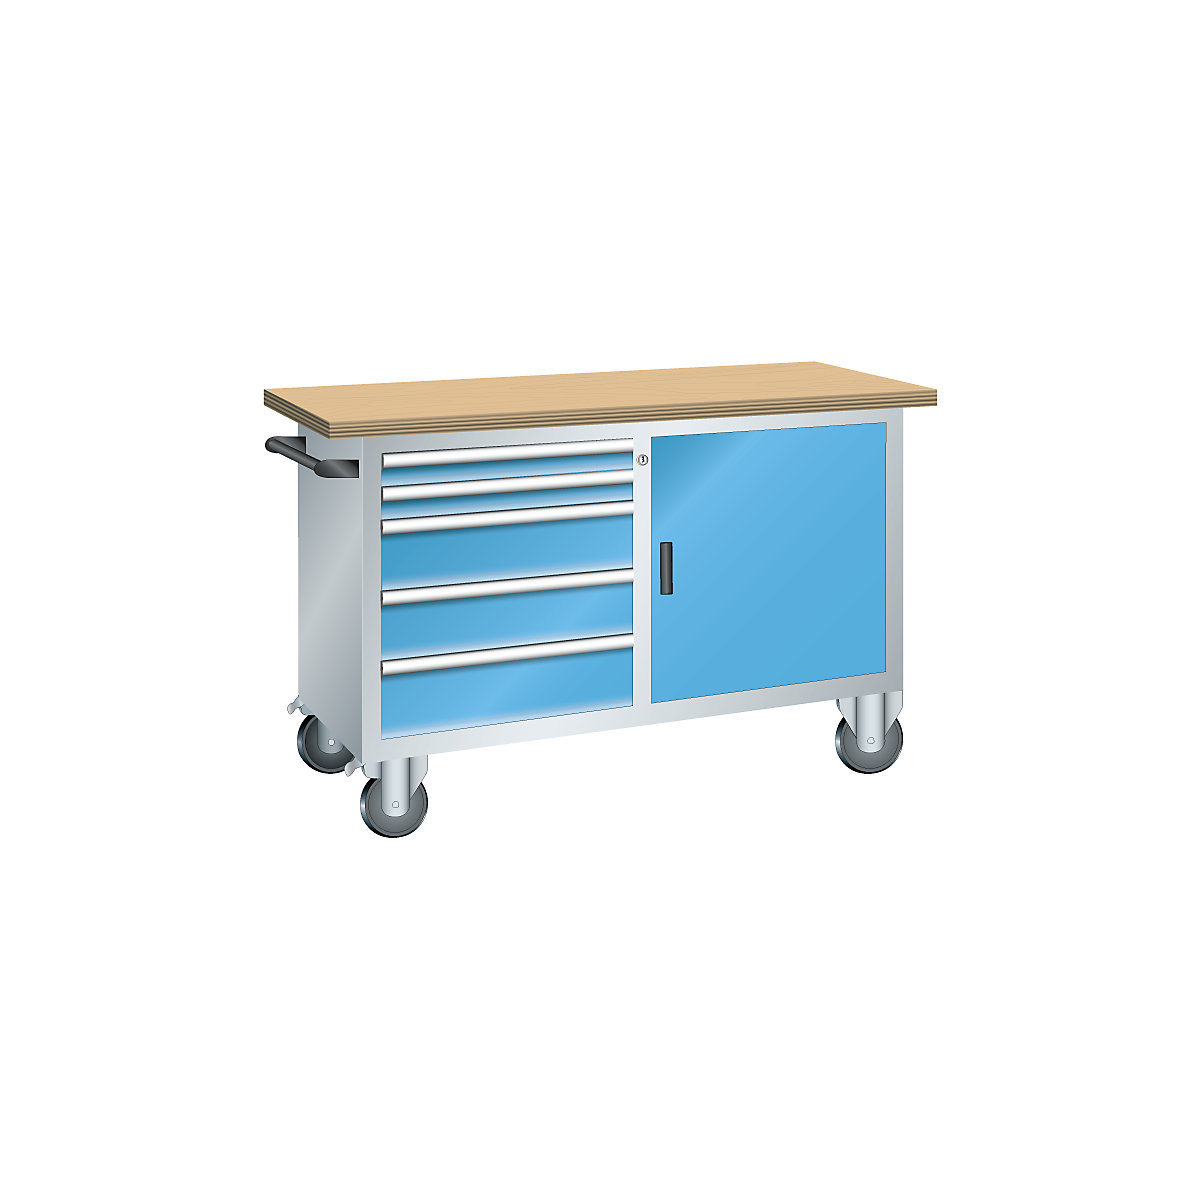 Compact workbench, mobile - LISTA